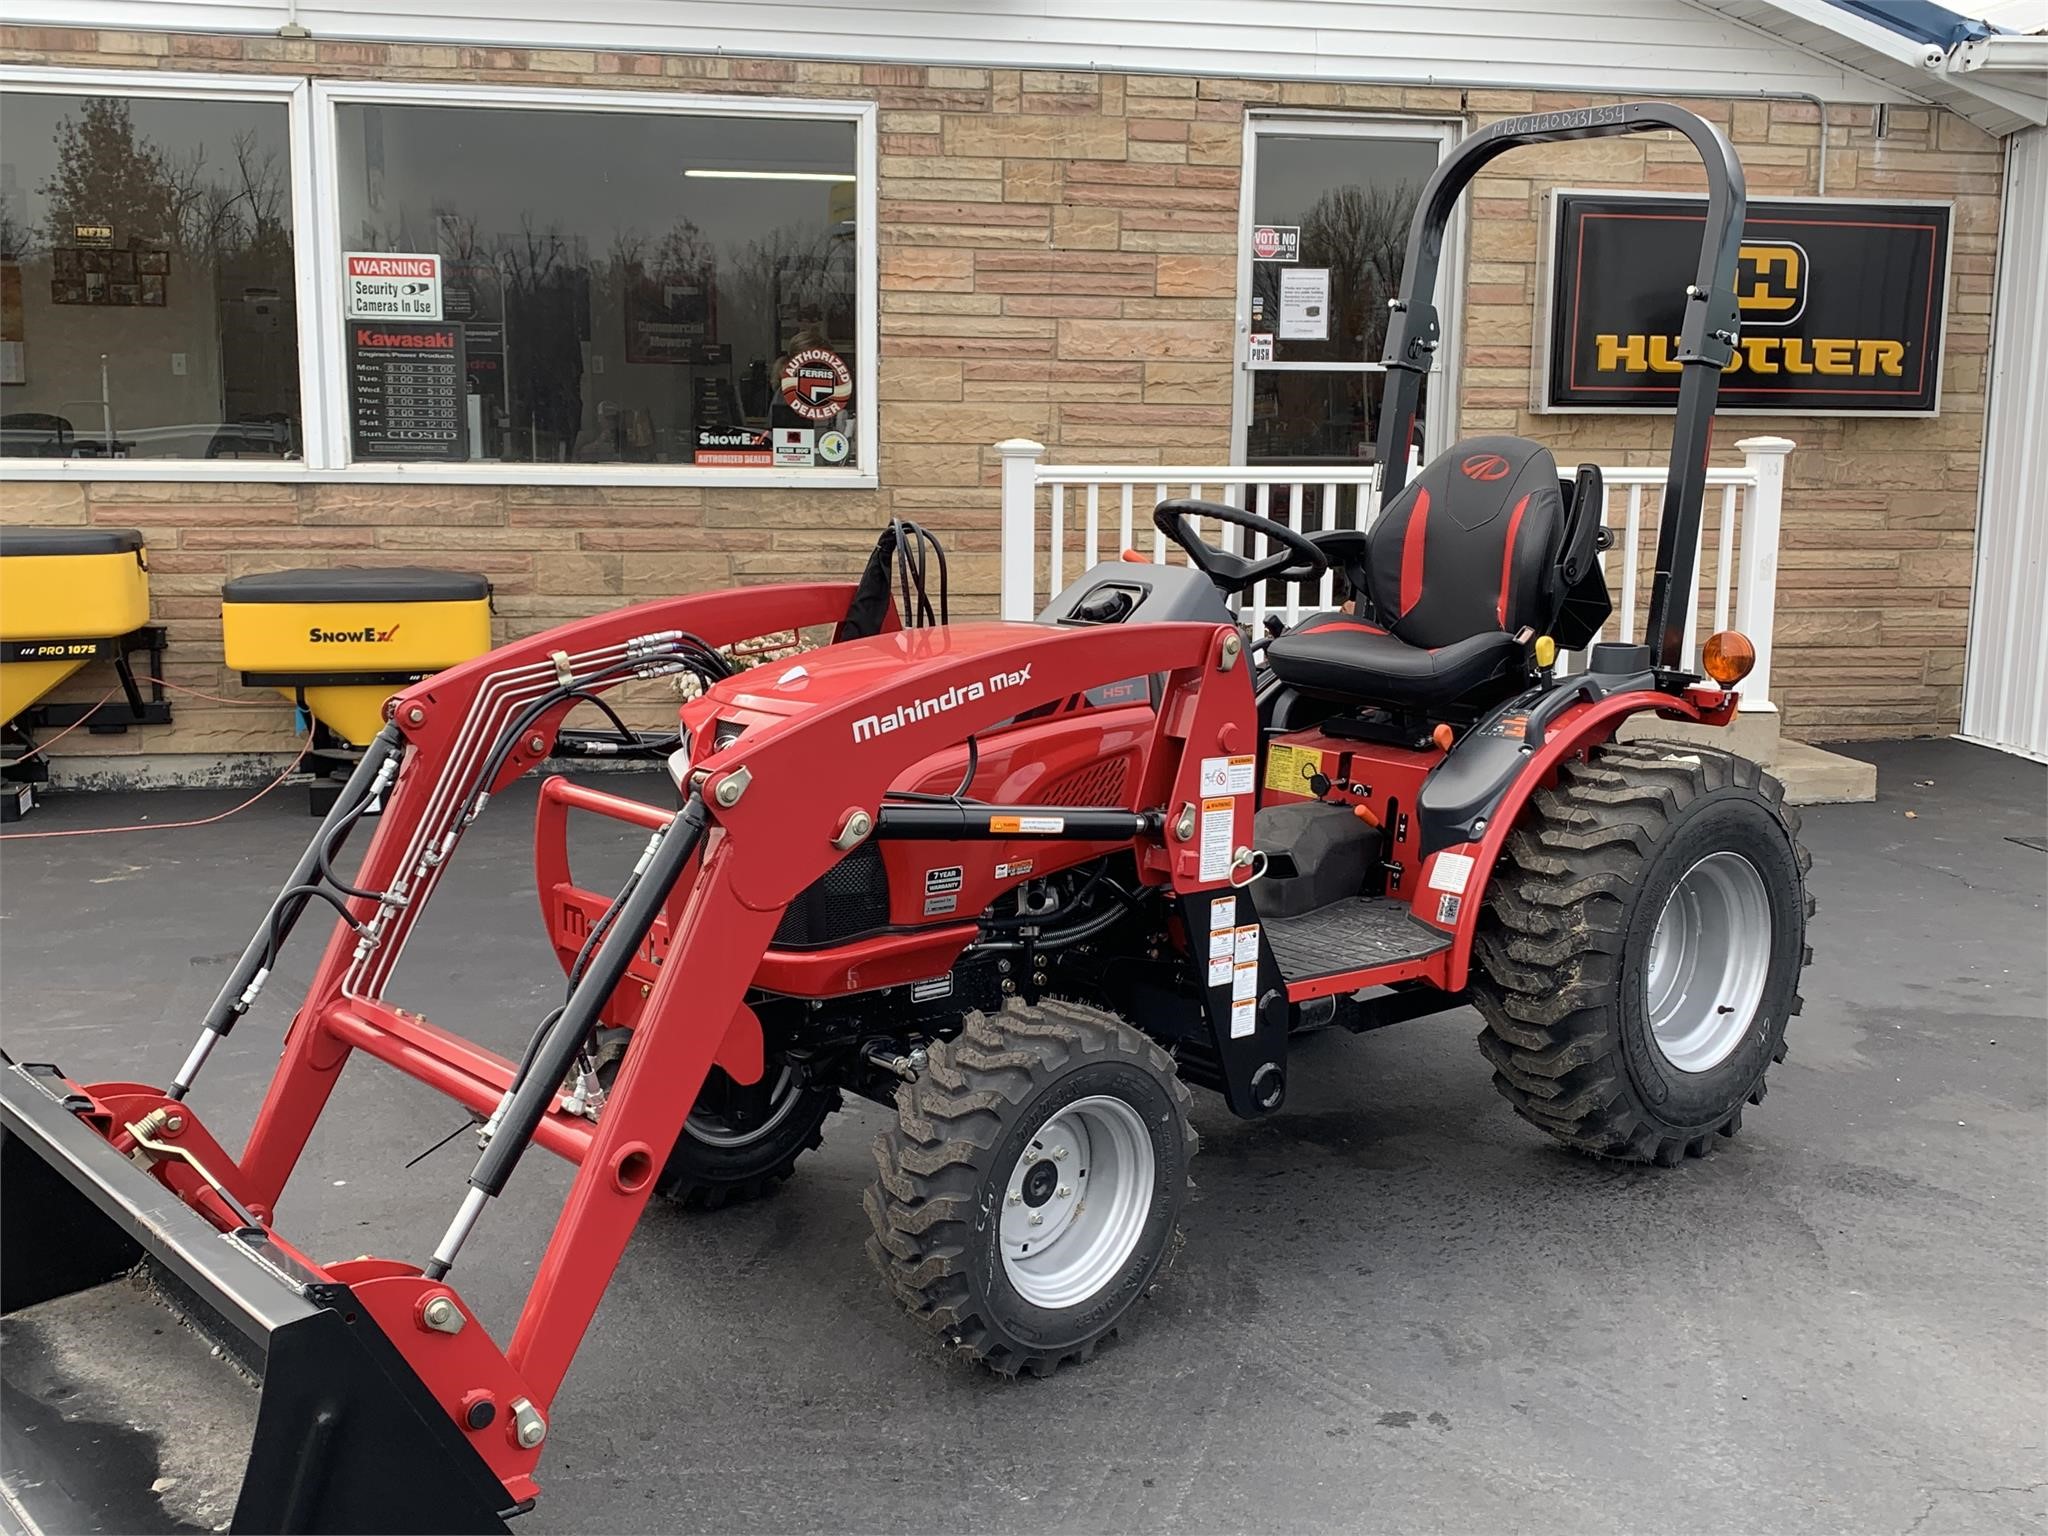 2020 MAHINDRA MAX 26XLT HST For Sale in Millstadt, Illinois | www ...